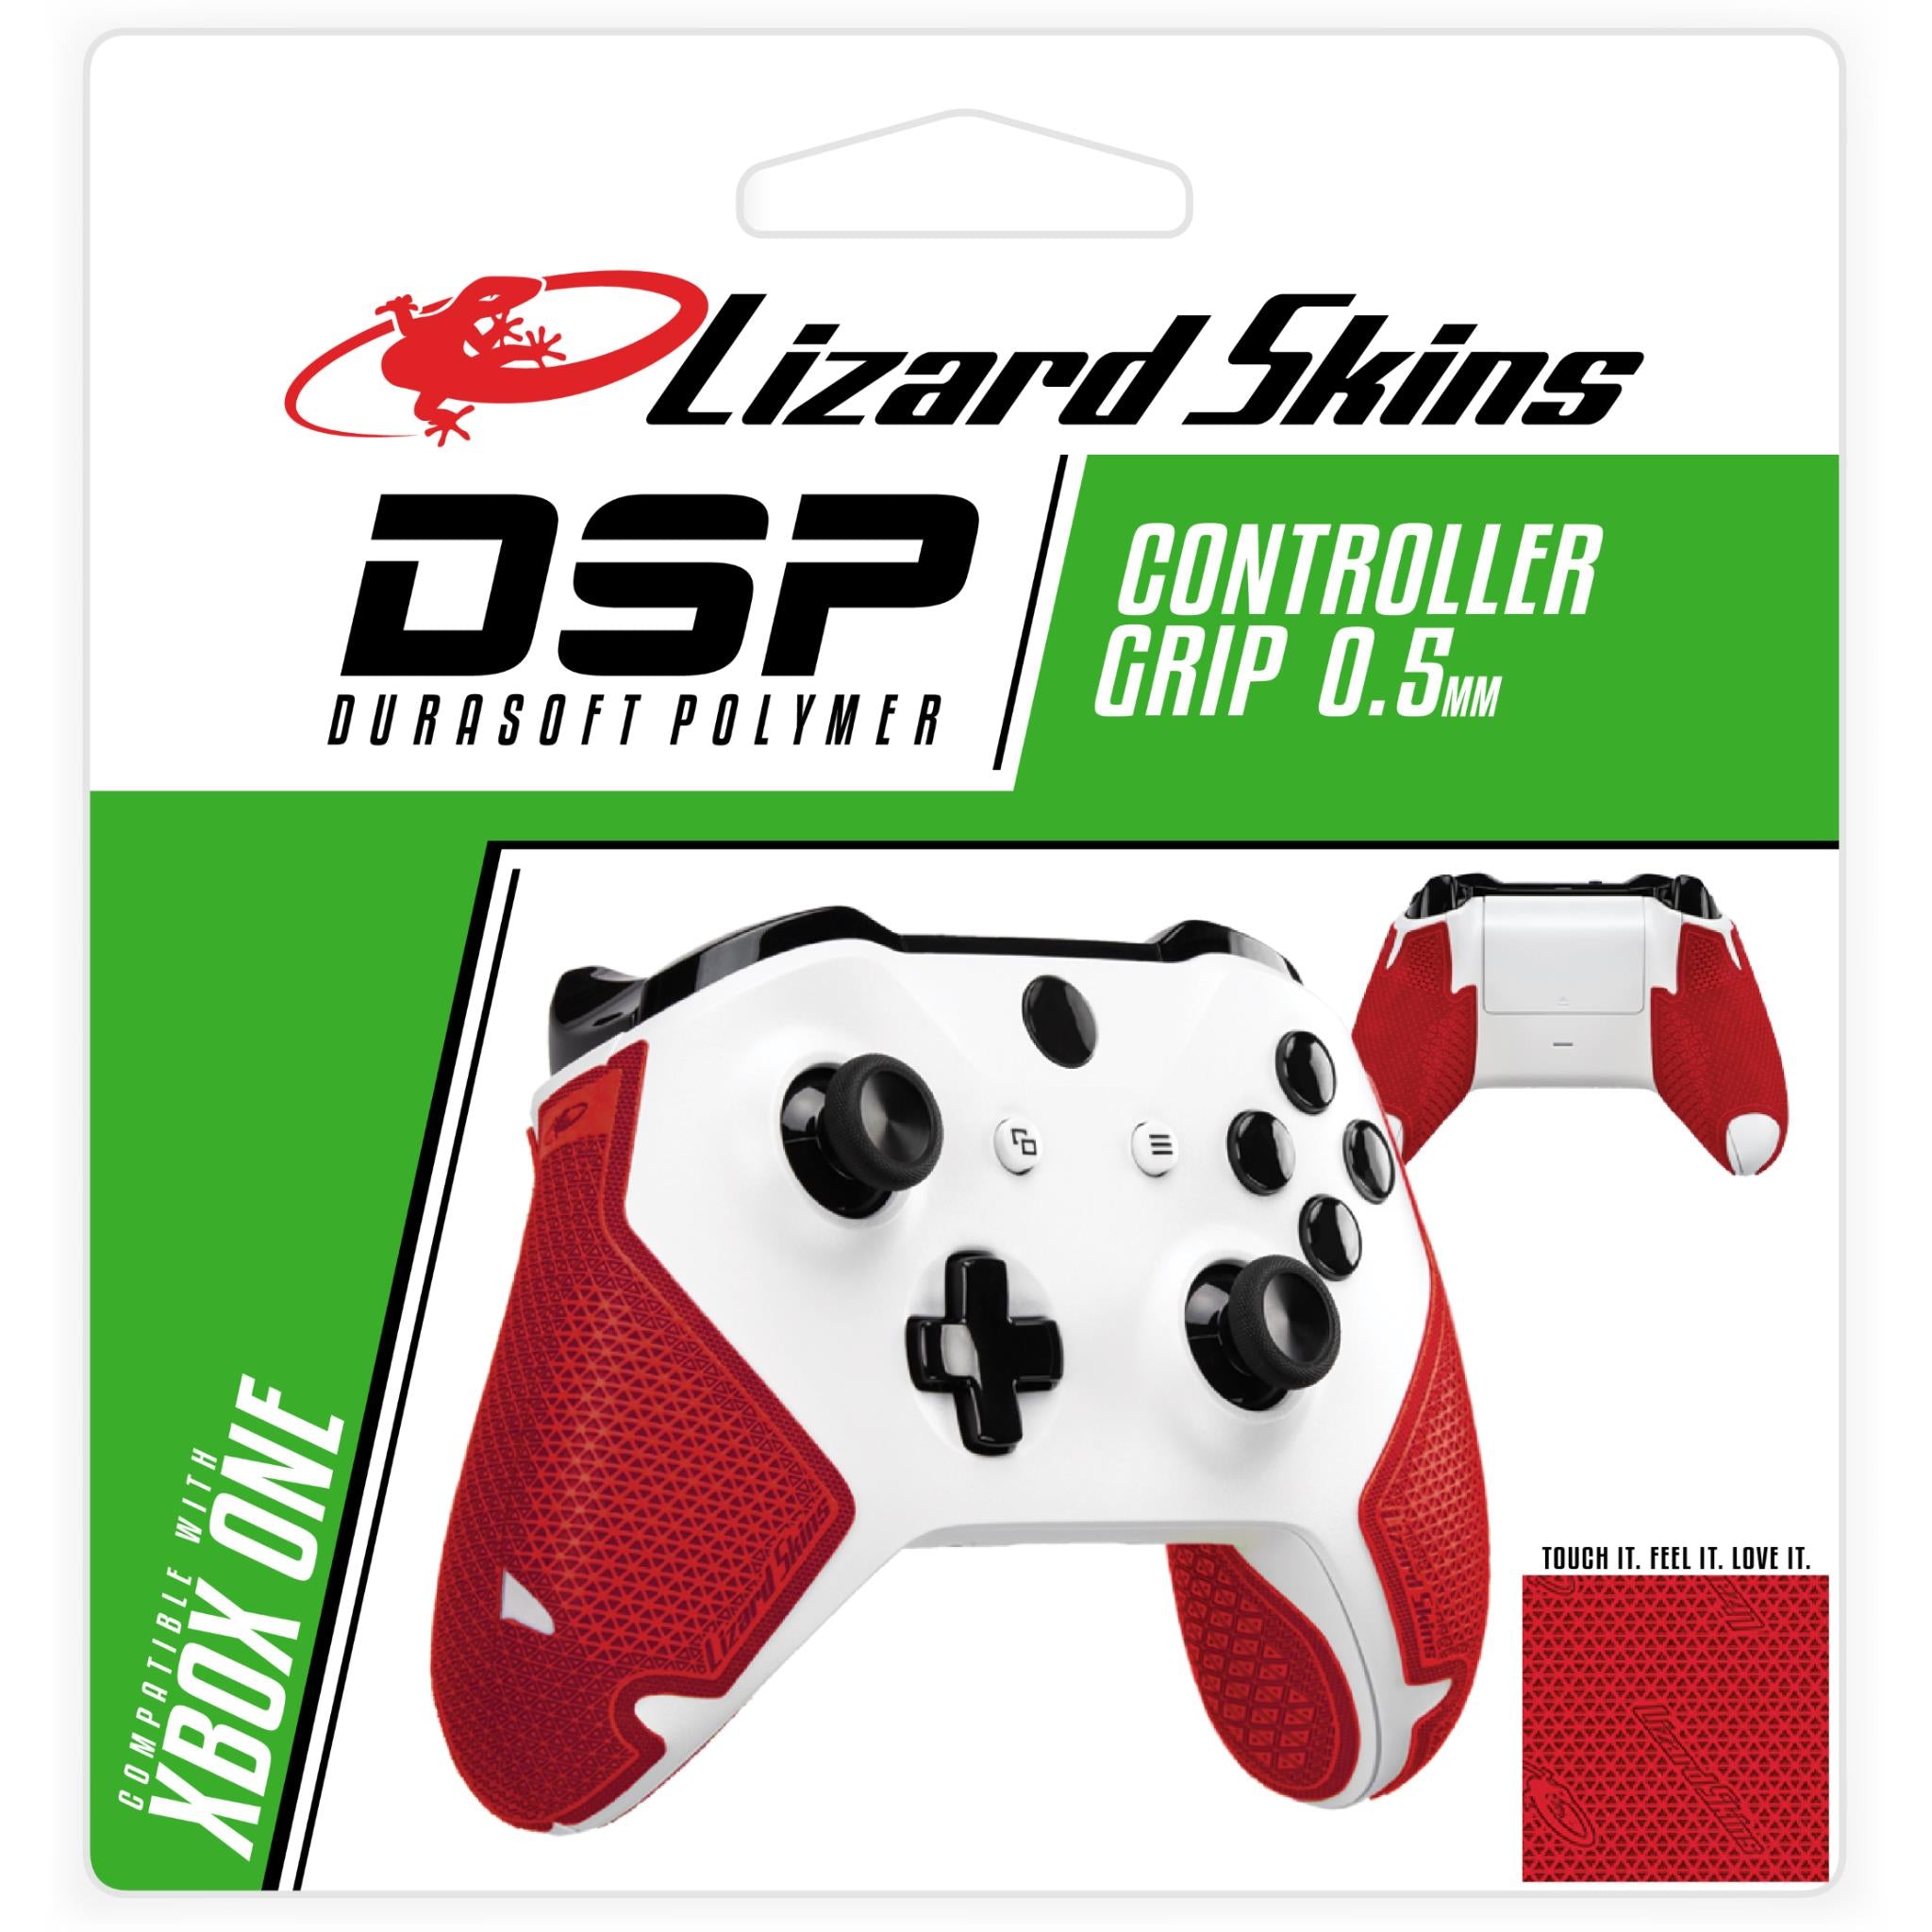 lizard skins dsp controller grip for xbox one (crimson red)